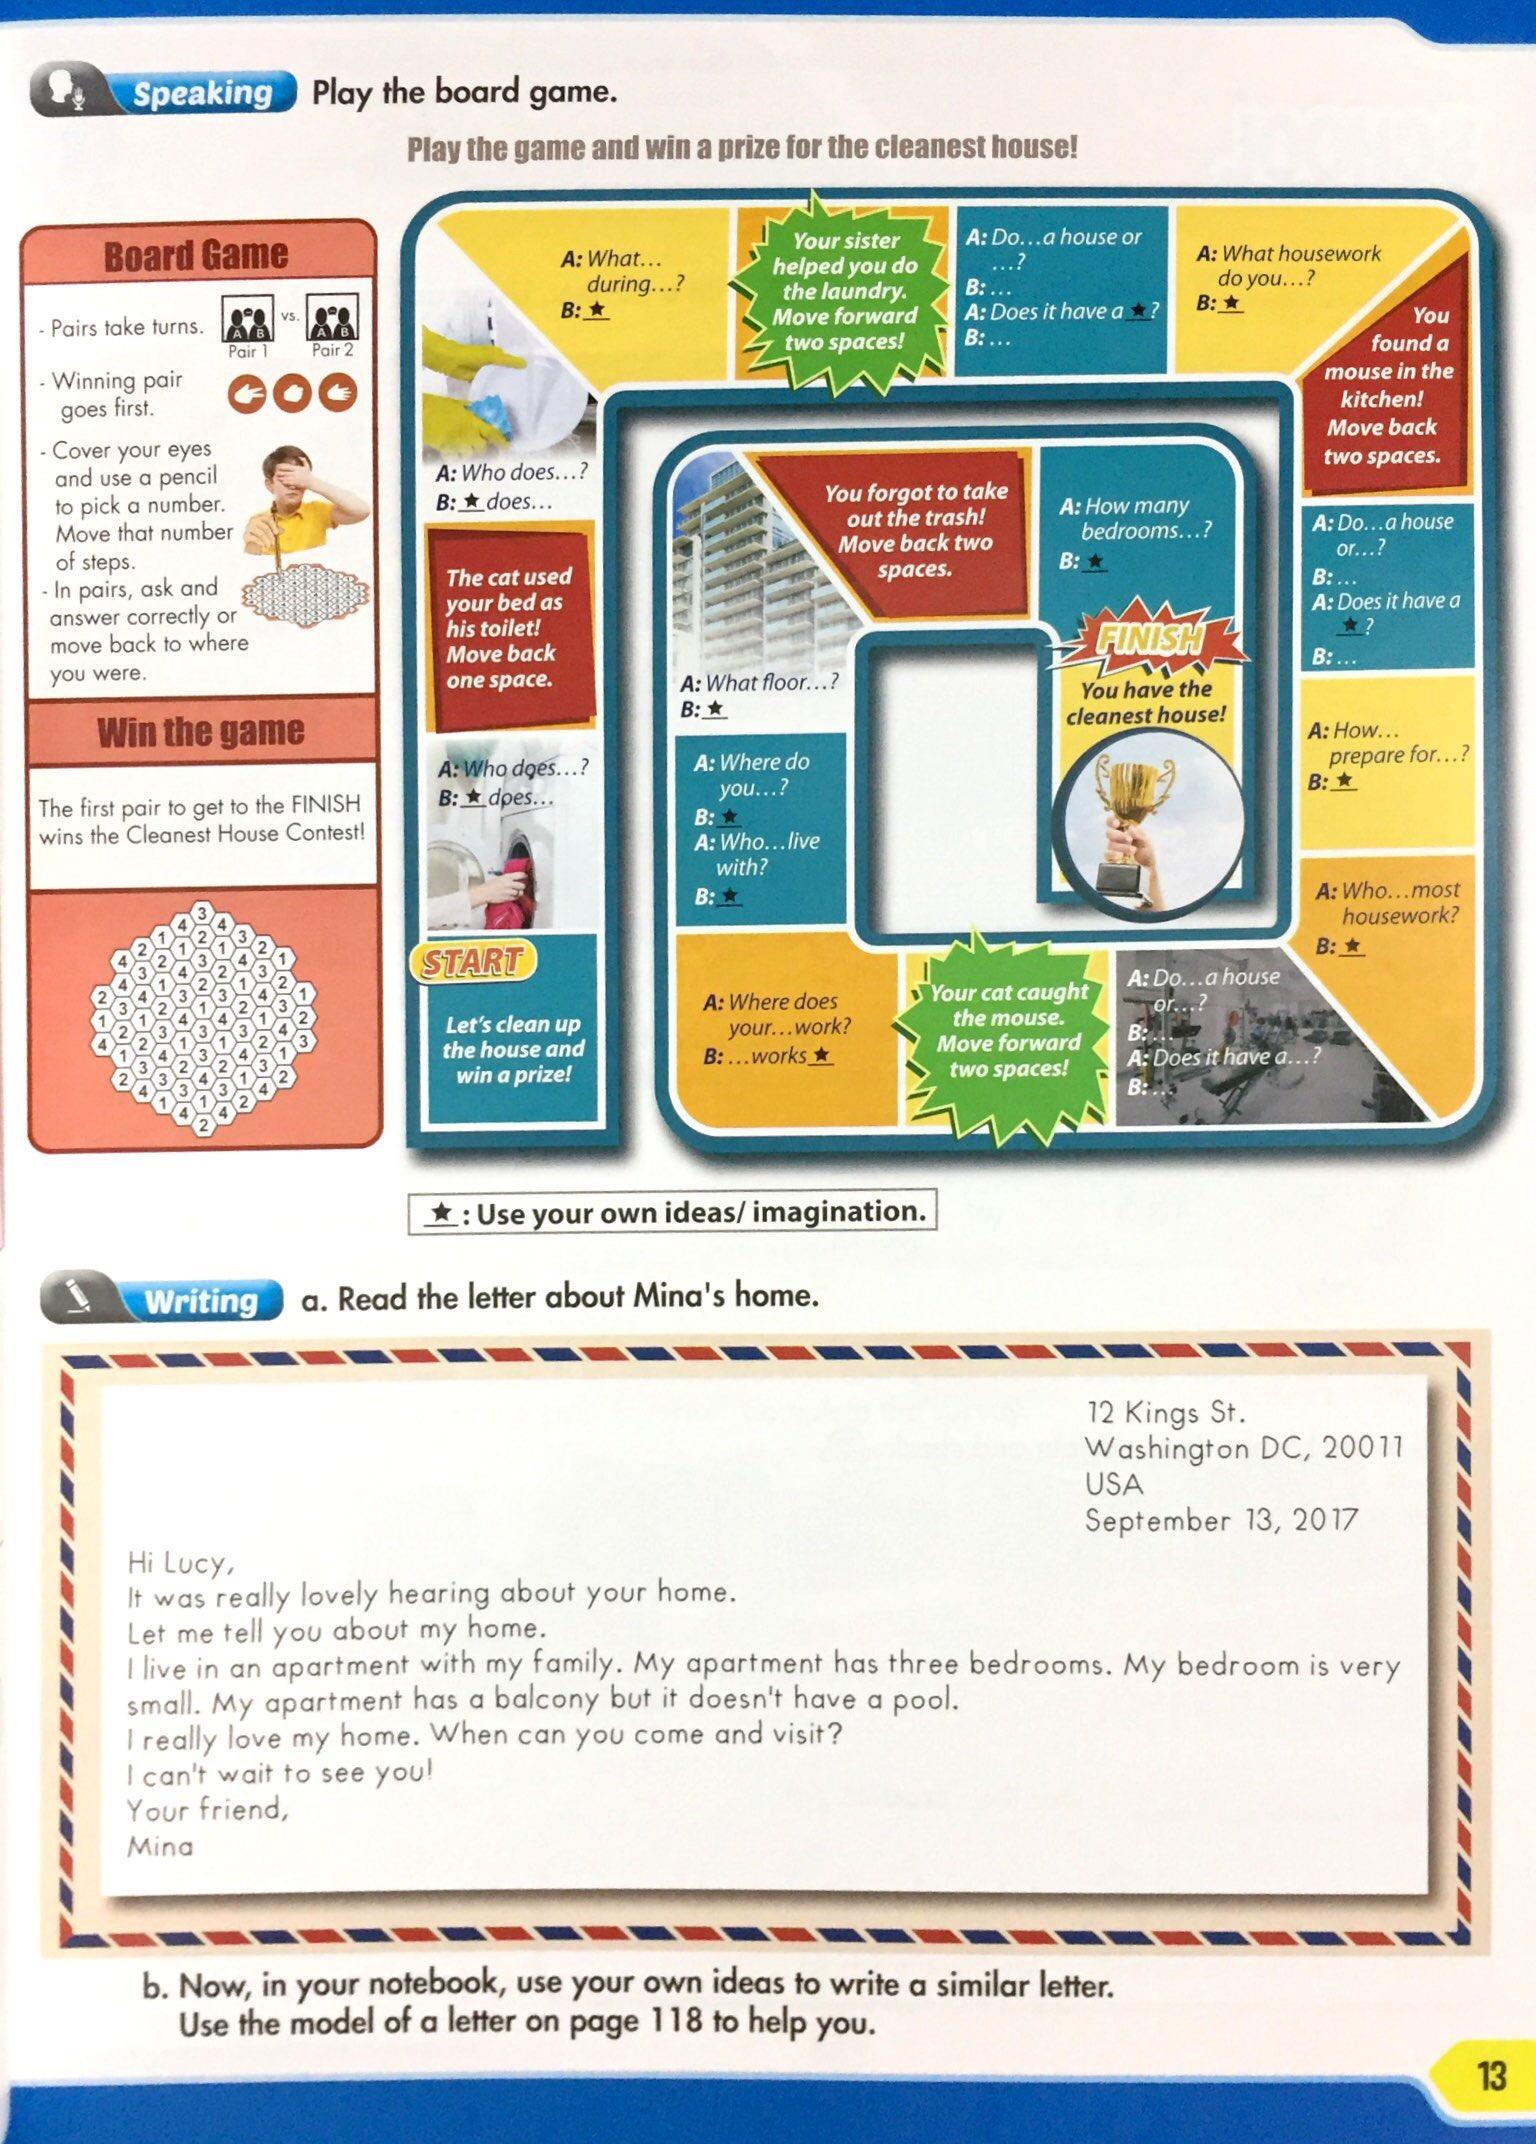 i-Learn Smart World 6 Student Book